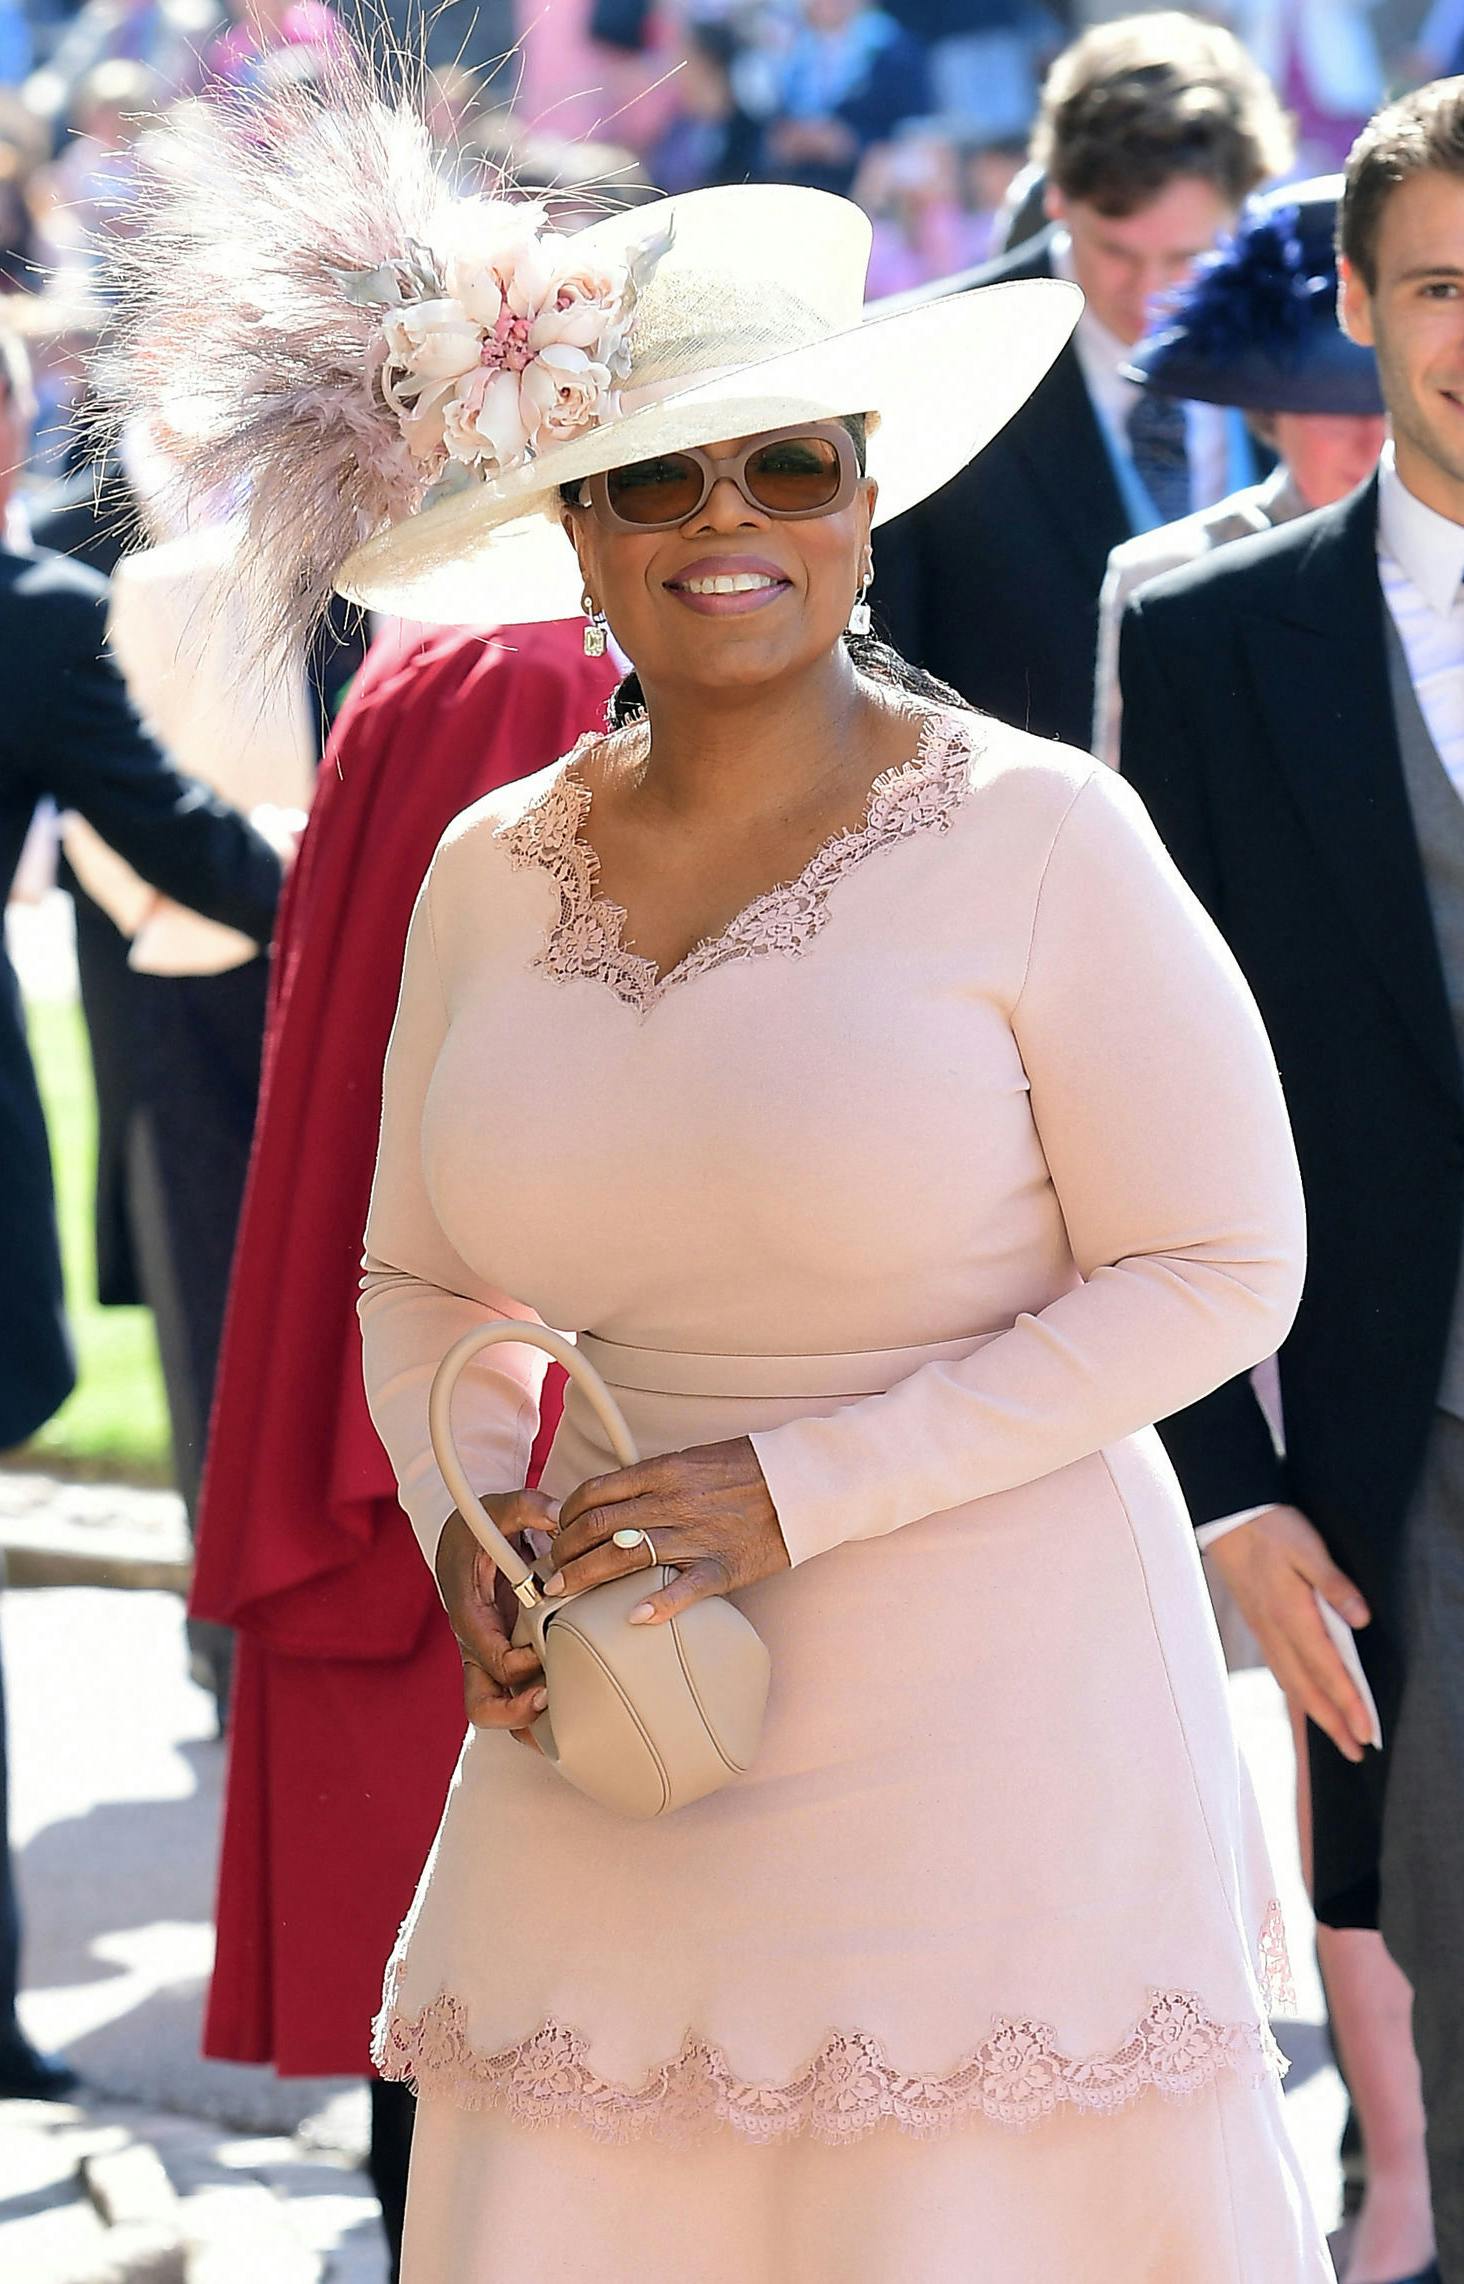 US presenter Oprah Winfrey arrives for the wedding ceremony of Britain's Prince Harry, Duke of Sussex and US actress Meghan Markle at St George's Chapel, Windsor Castle, in Windsor, on May 19, 2018. Ian West / POOL / AFP